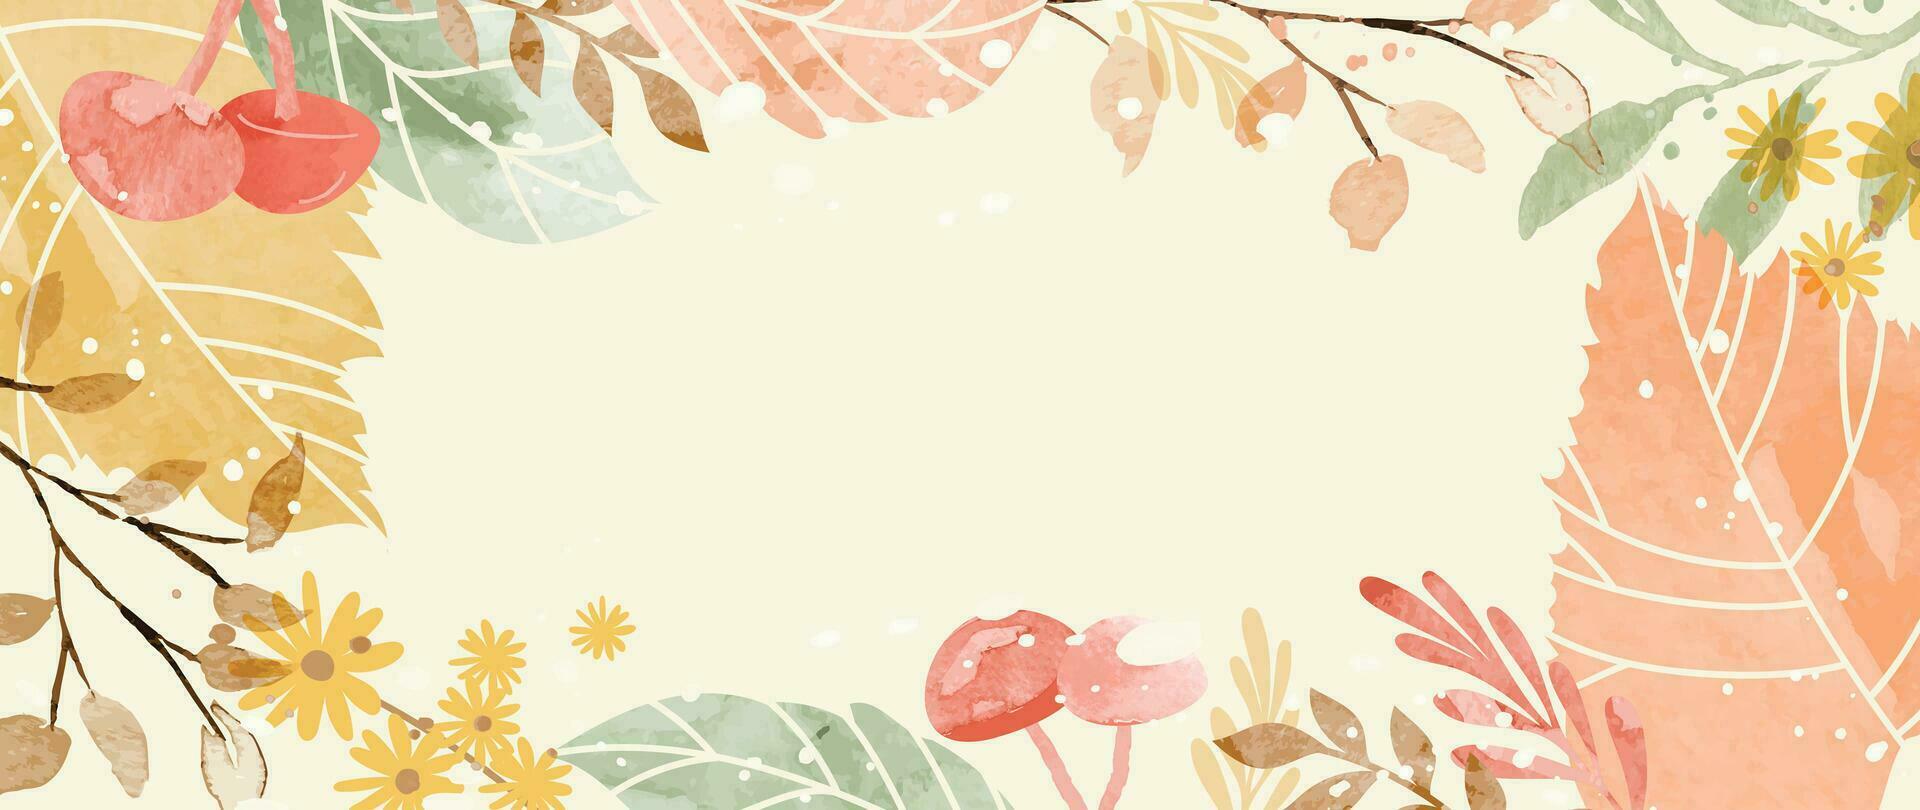 Autumn foliage in watercolor vector background. Abstract wallpaper design with maple, oak, flower, line art, mushroom. Elegant botanical in fall season illustration suitable for fabric, prints, cover.